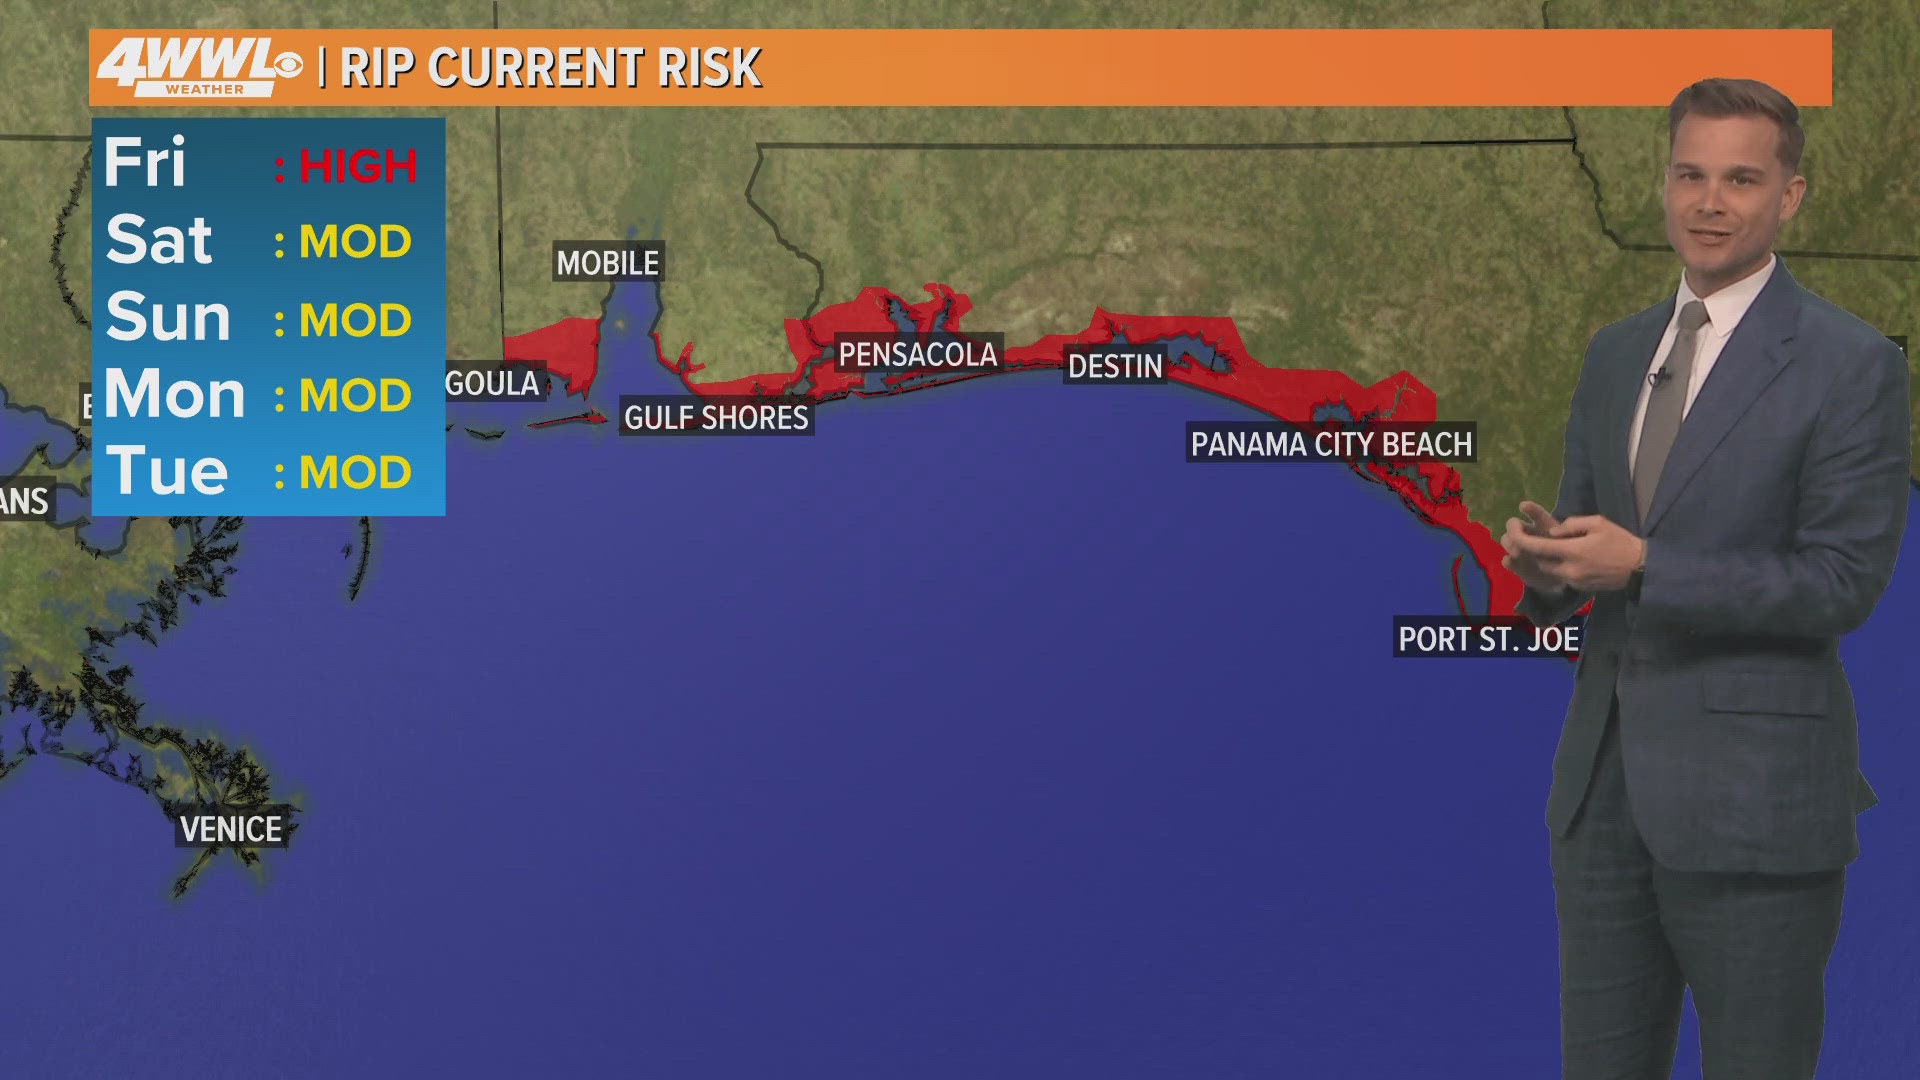 Meteorologist Payton Malone says there is a rip current risk in Gulf Coast waters along the beach for the weekend.